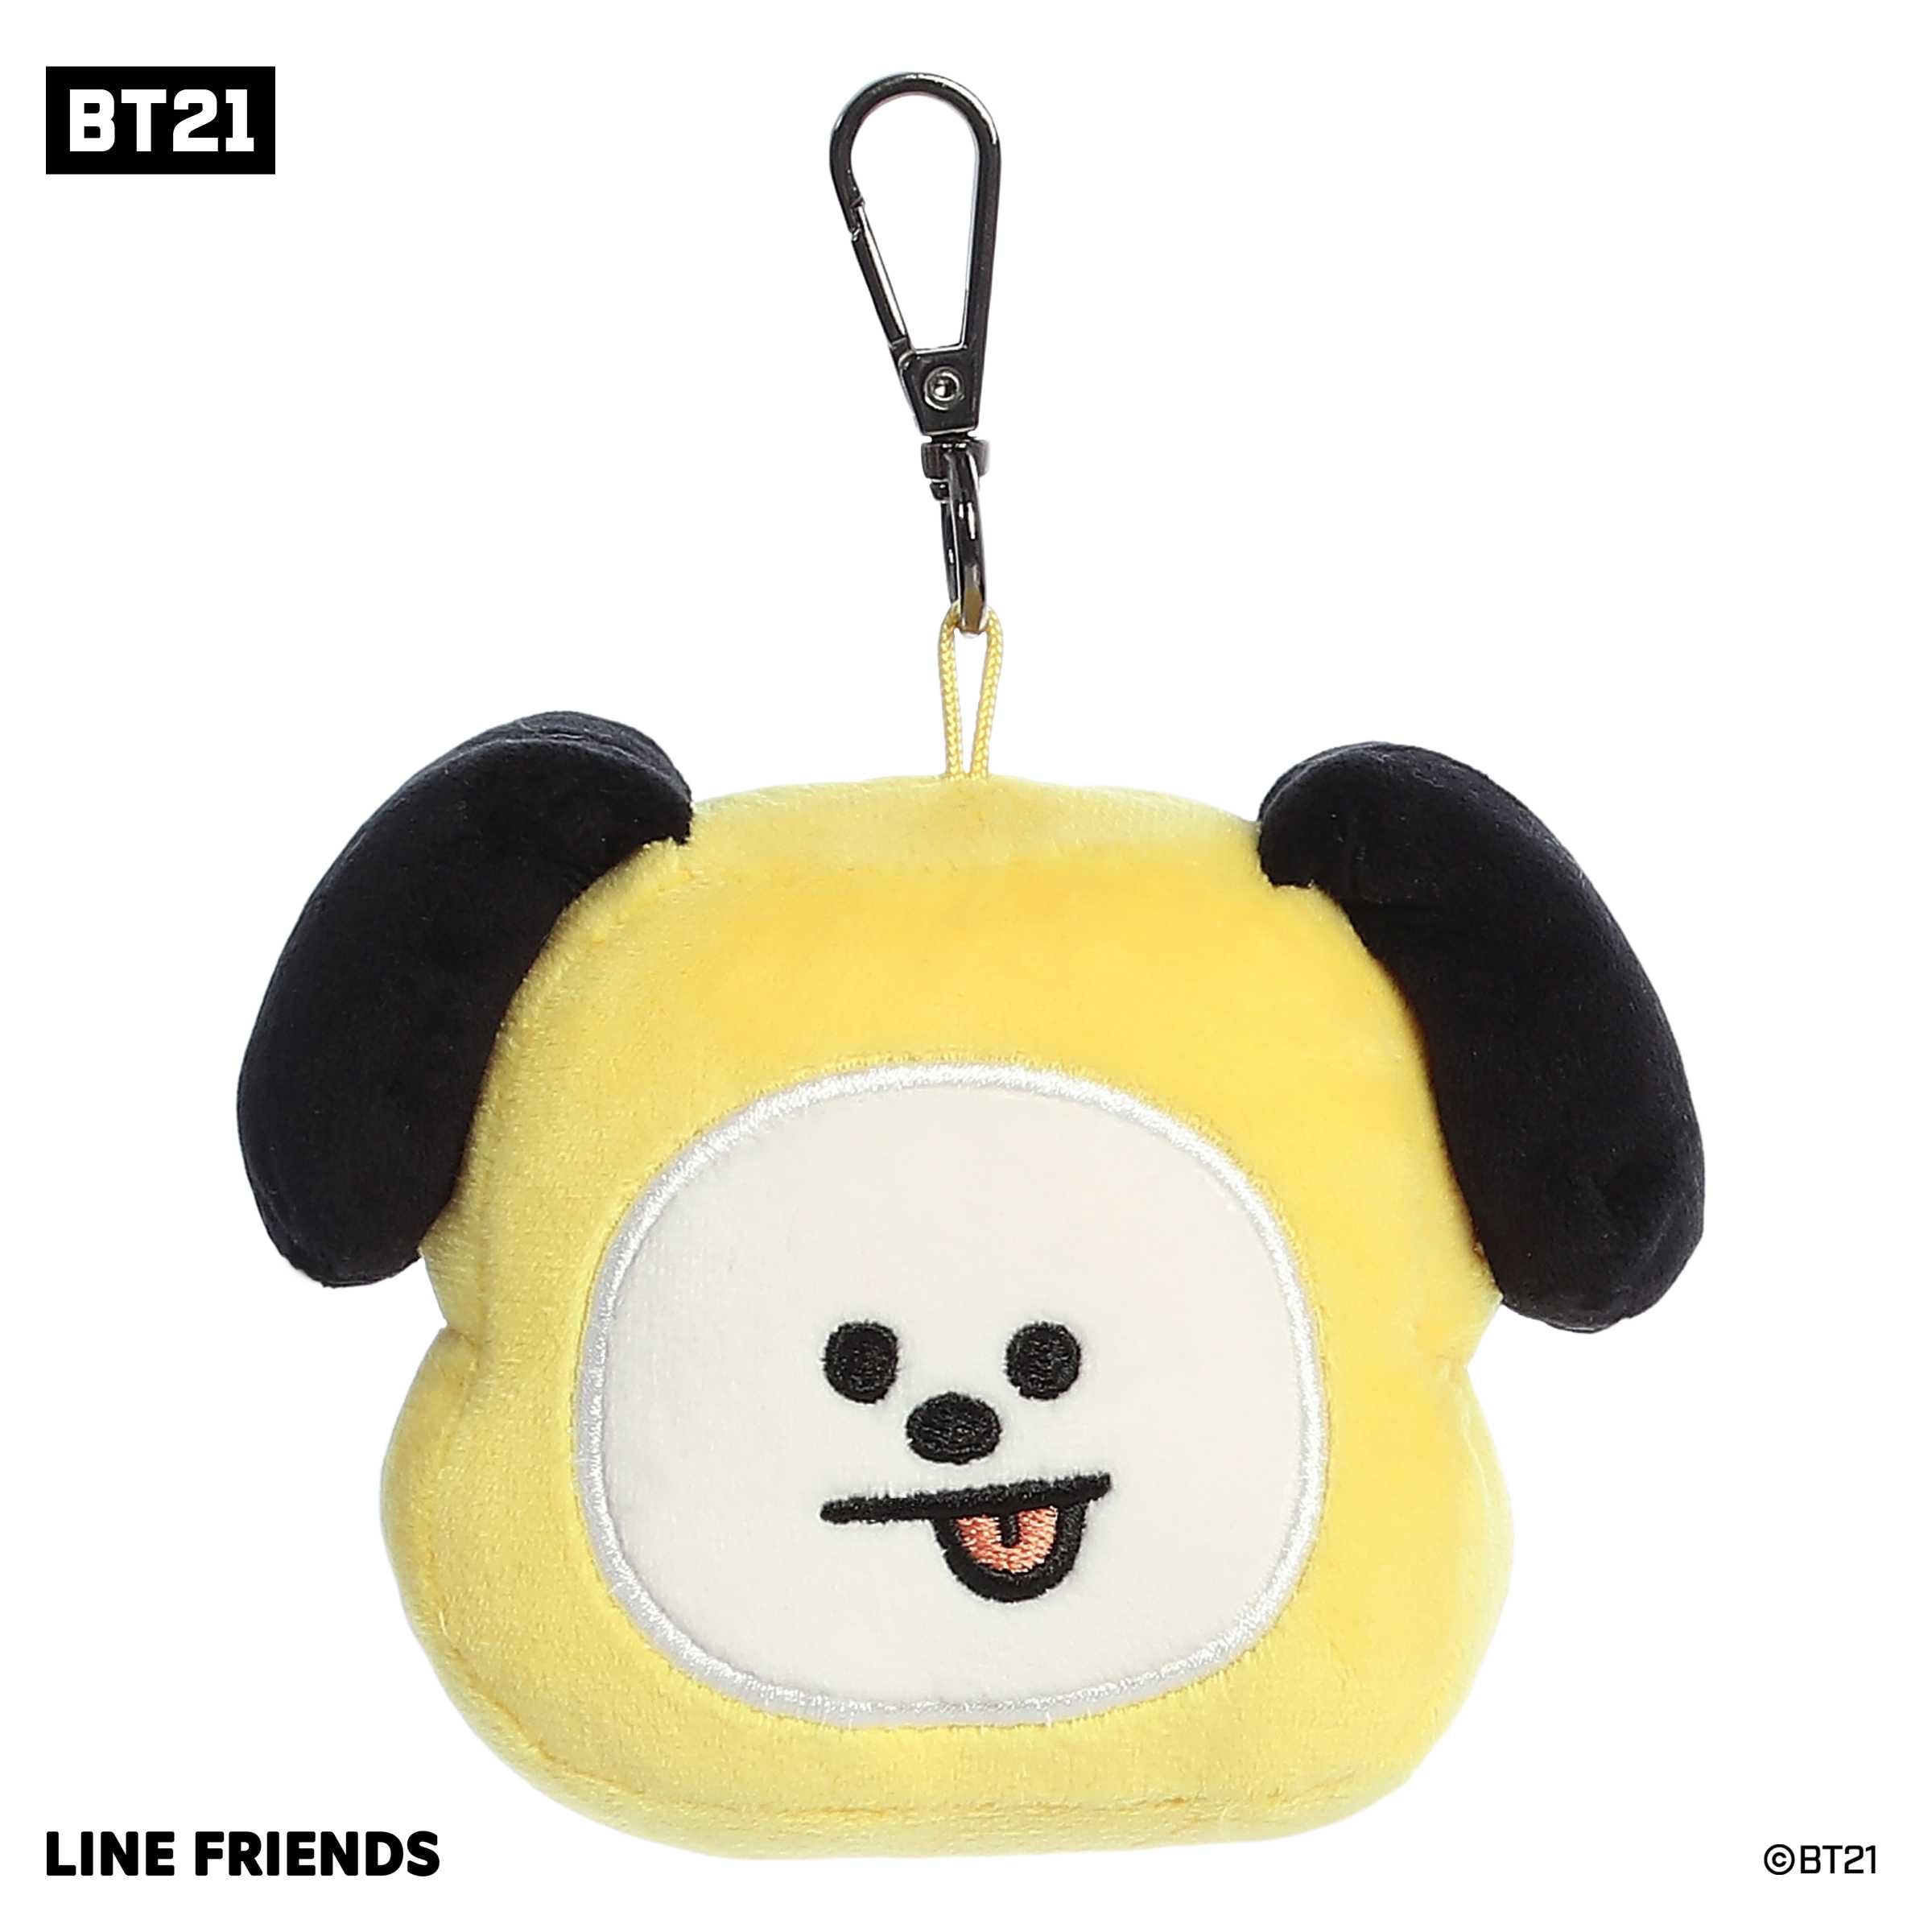 Cute BT21 plush Clip-On with a white and yellow soft body, black accents on face and ears, and an attached metal hook